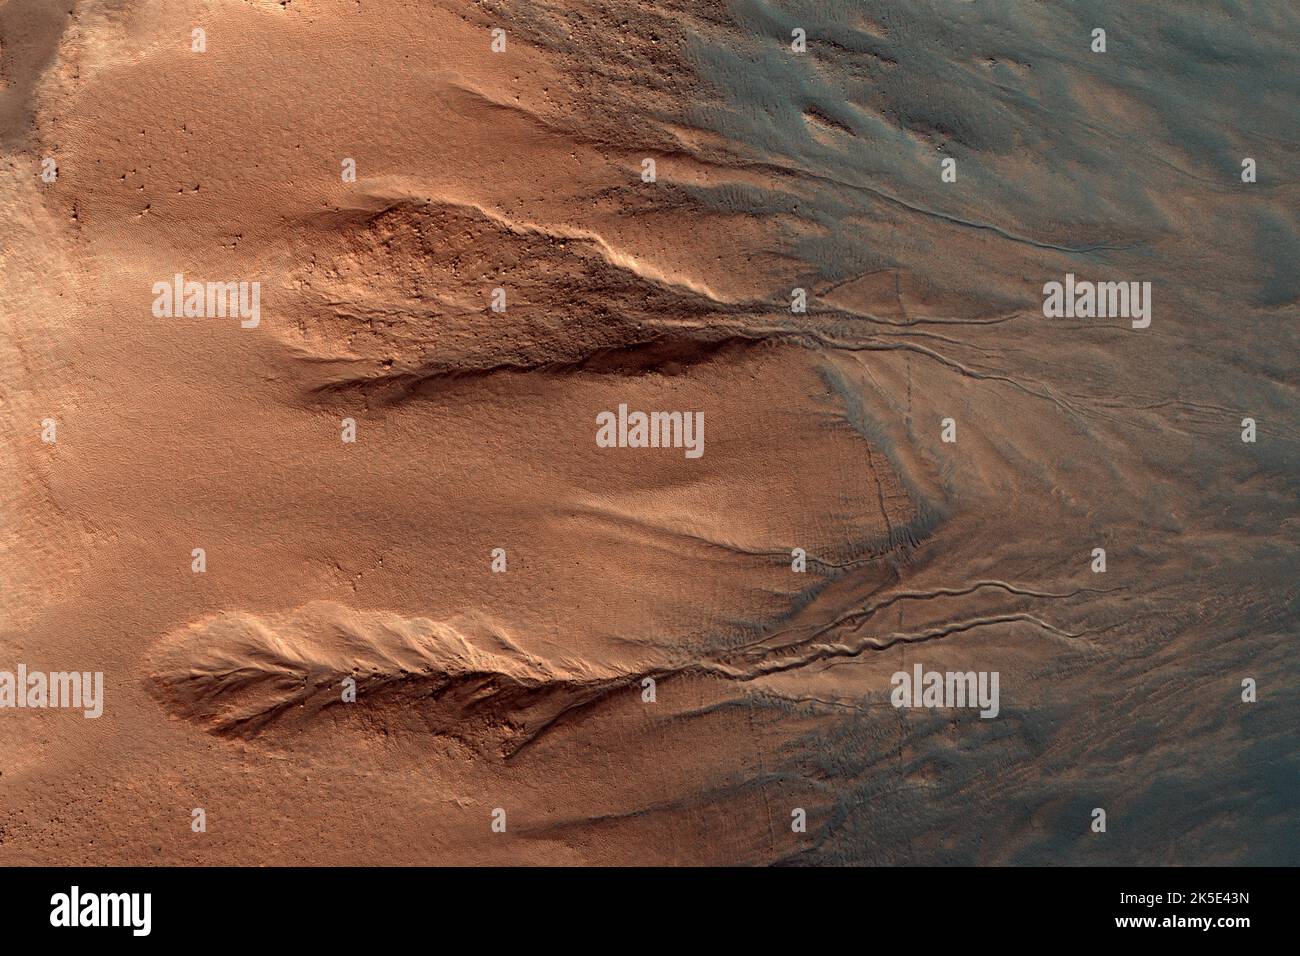 MARS. Gullies are relatively common features in the steep slopes of crater walls, possibly formed by dry mass movement, movement of carbon dioxide frost, or perhaps the melting of ground ice. This example shows a section of crater wall from the rocky crater rim at the far left of the image, down to the dark dusty dunes on the crater floor in the bottom right. The rock of the crater walls shows up deep orange, and the sandy deposits on the crater floor and the base of the crater walls appear blue (not actual colour.)  An optimised version of NASA imagery. Credit: NASA/JPL/UArizona Stock Photo